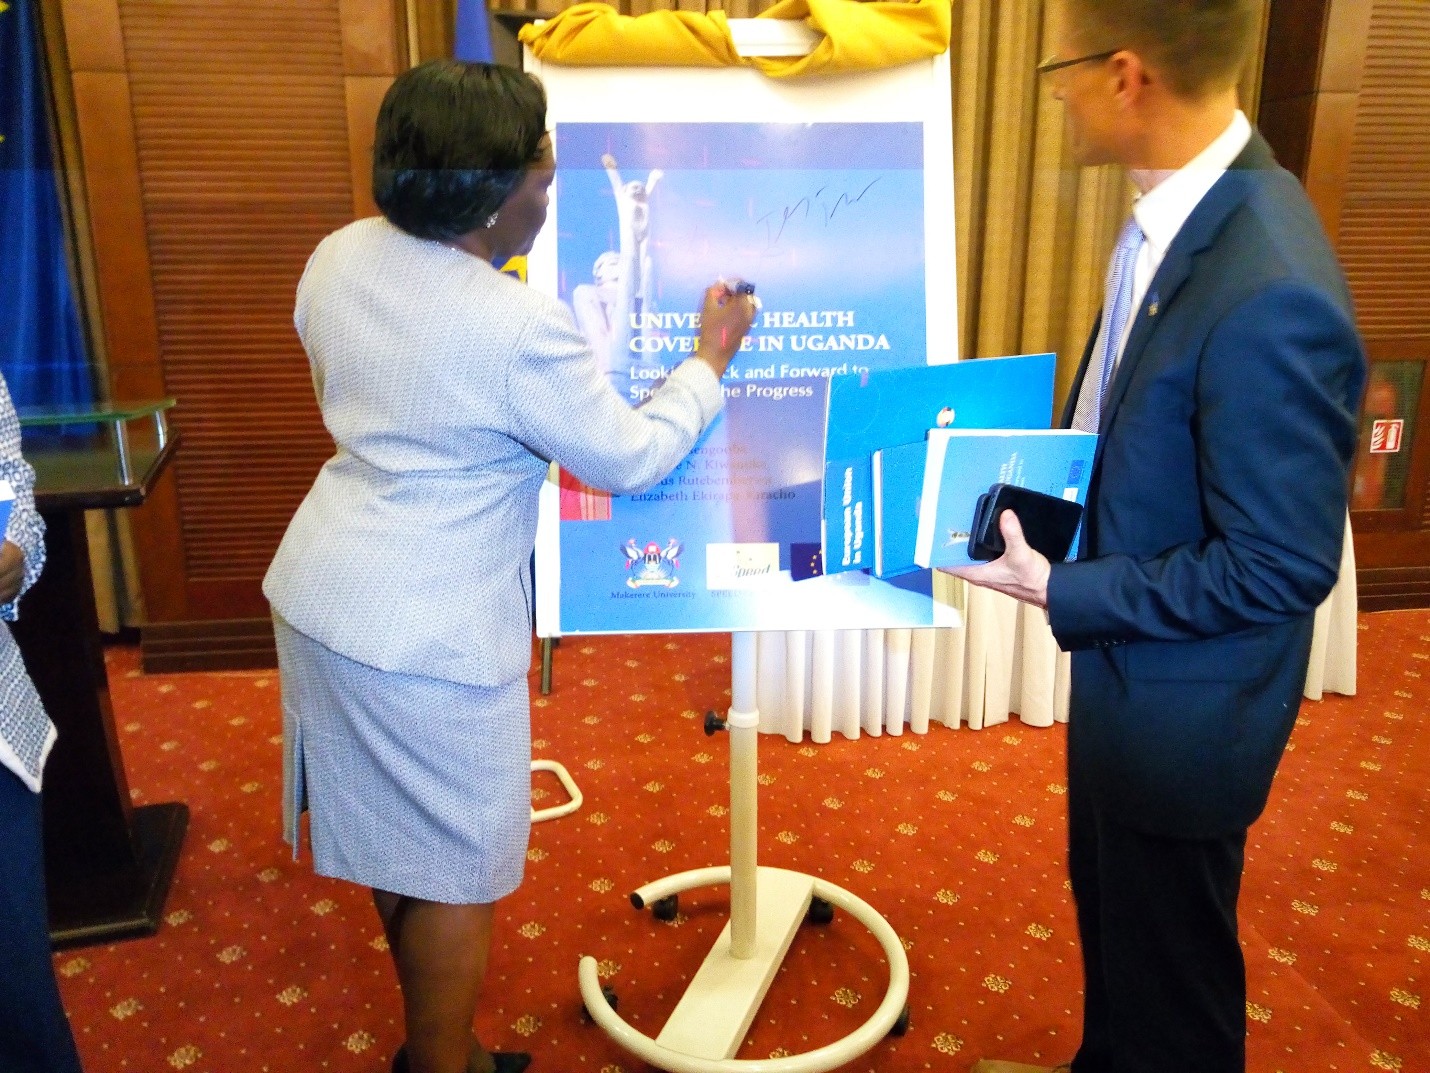 Hon Opendi autographs the dummy book cover as the EU Representative, Mr. Tiedemann looks on after he has autographed as well.